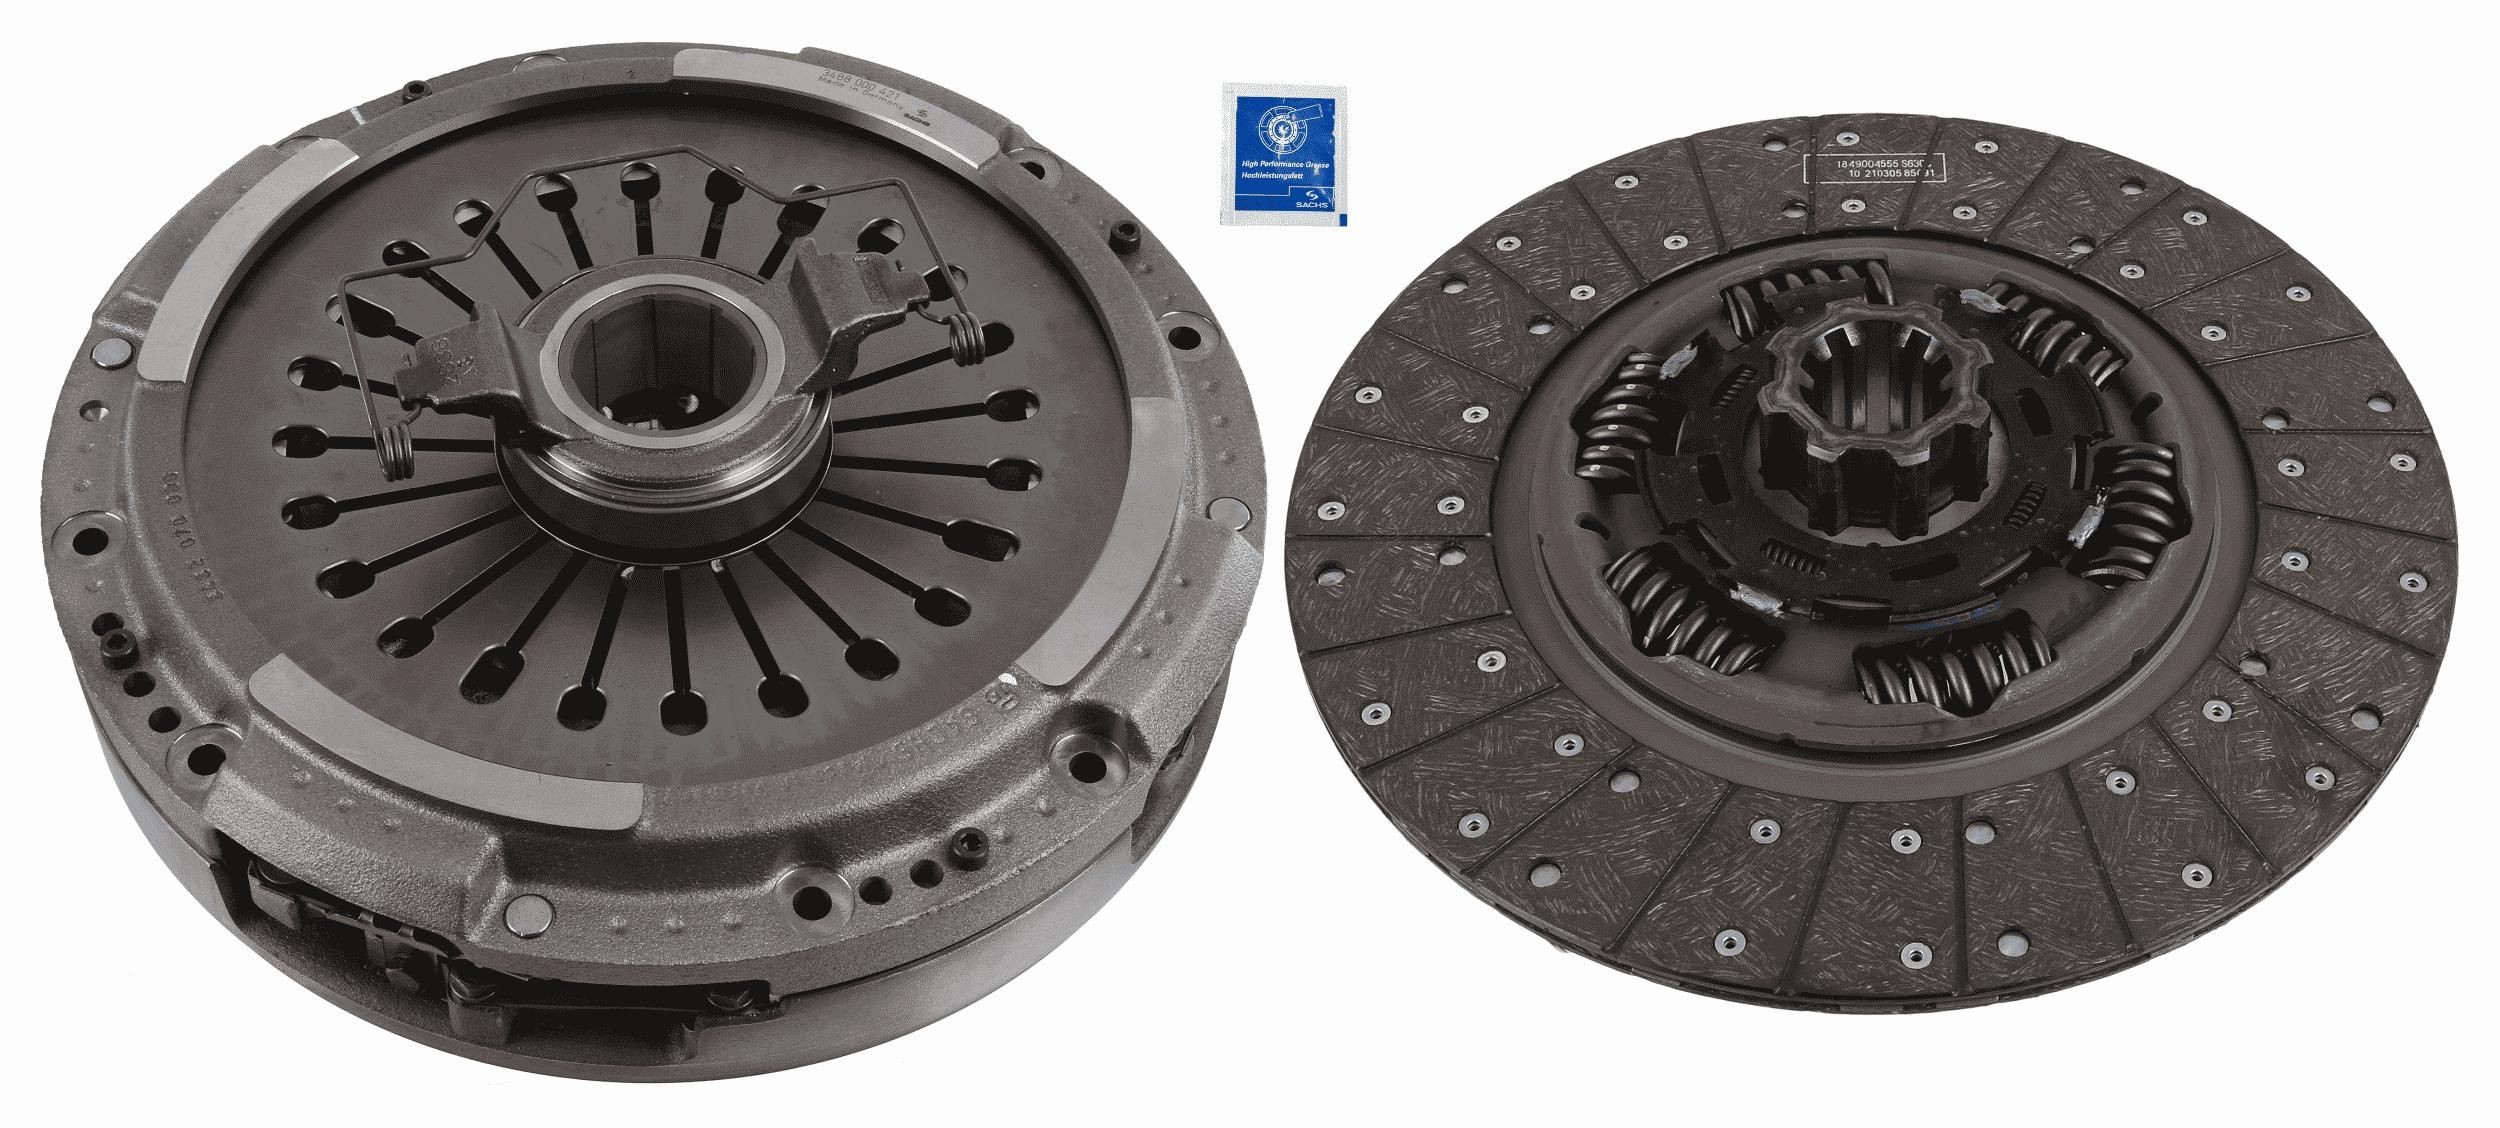 SACHS with clutch release bearing, 400mm Ø: 400mm Clutch replacement kit 3400 700 707 buy